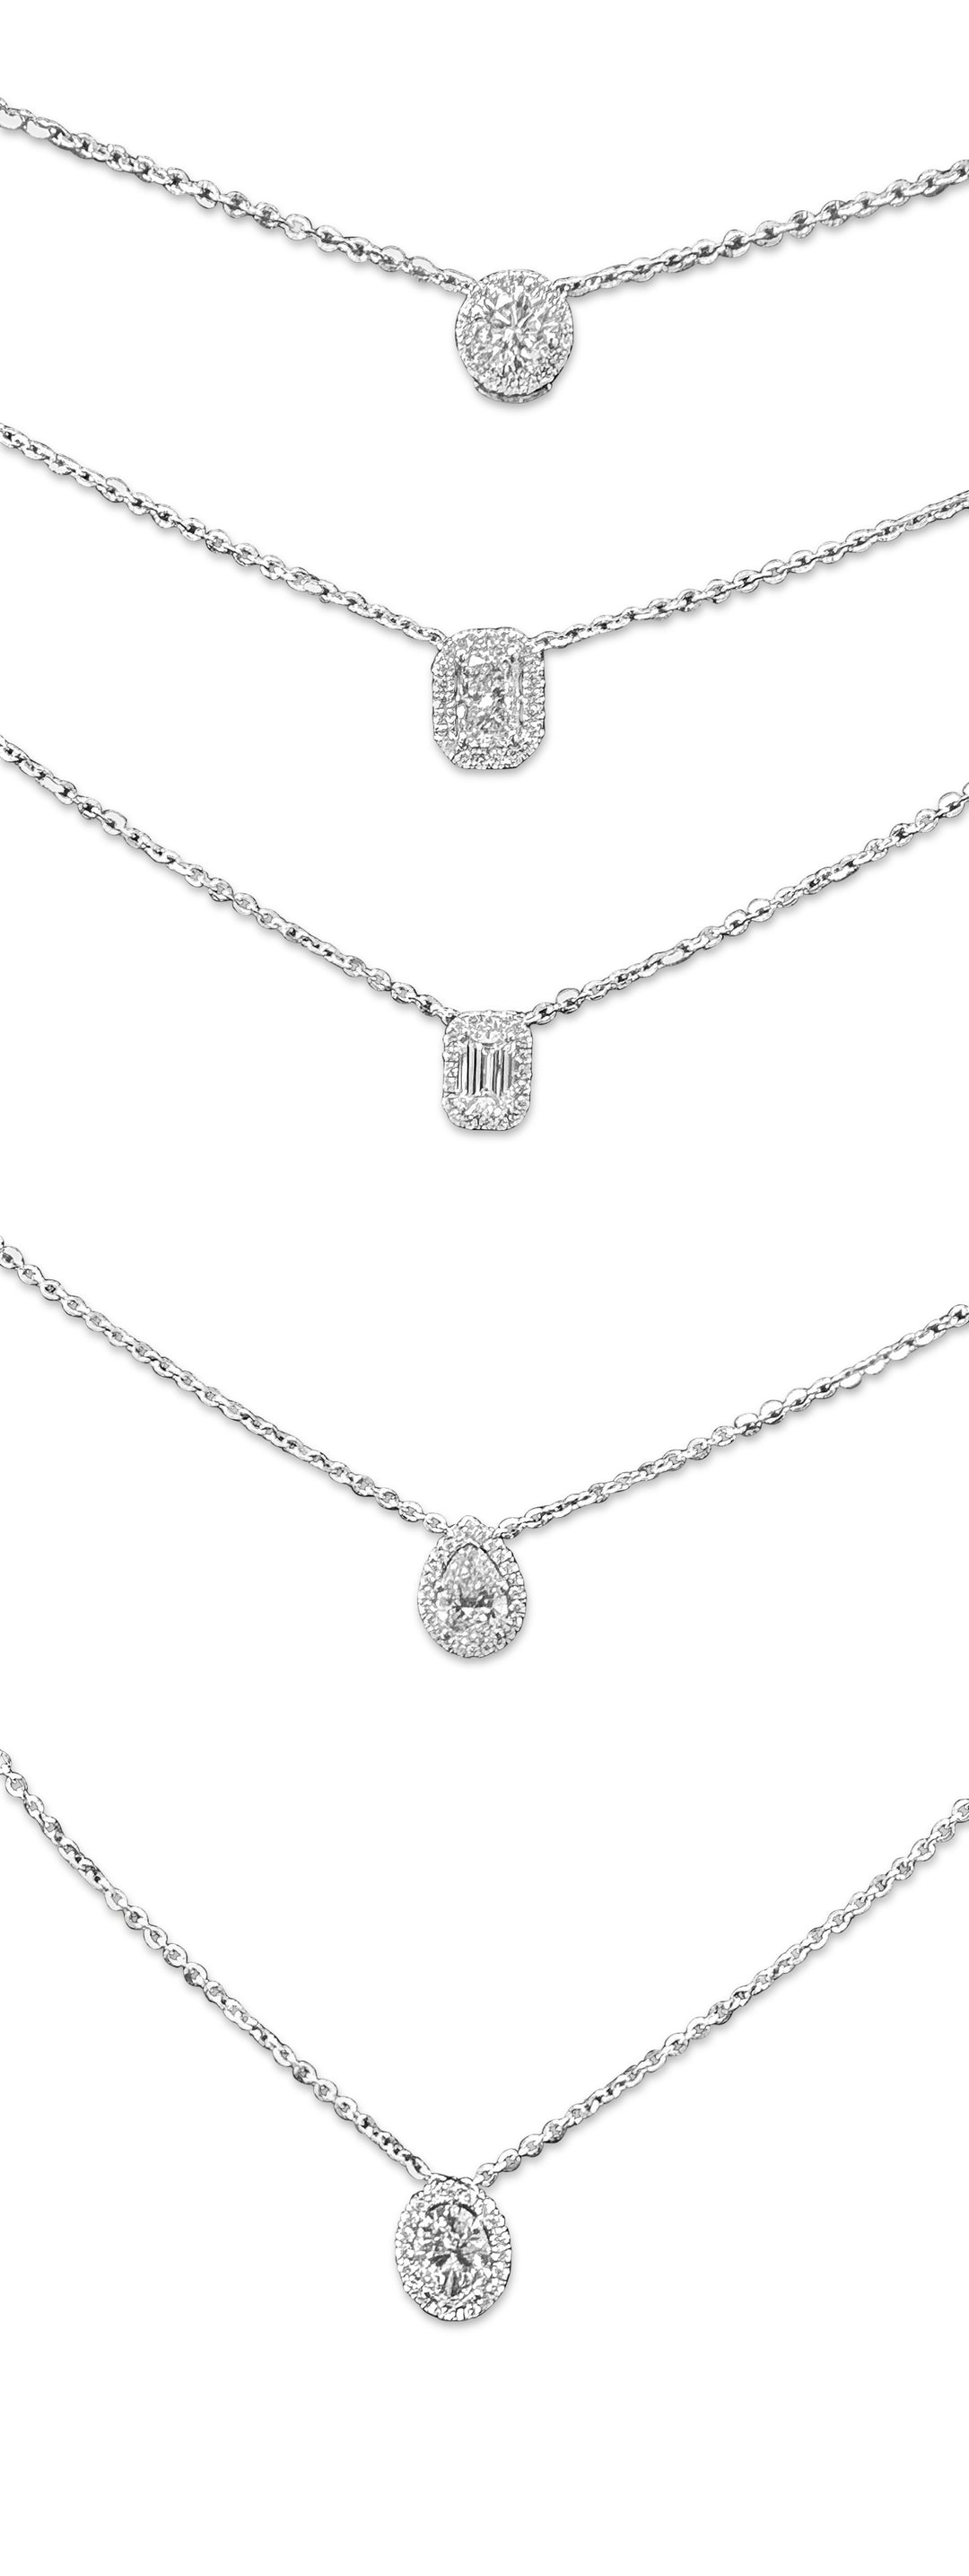 Various Lab-Grown Diamond Halo Necklaces Available